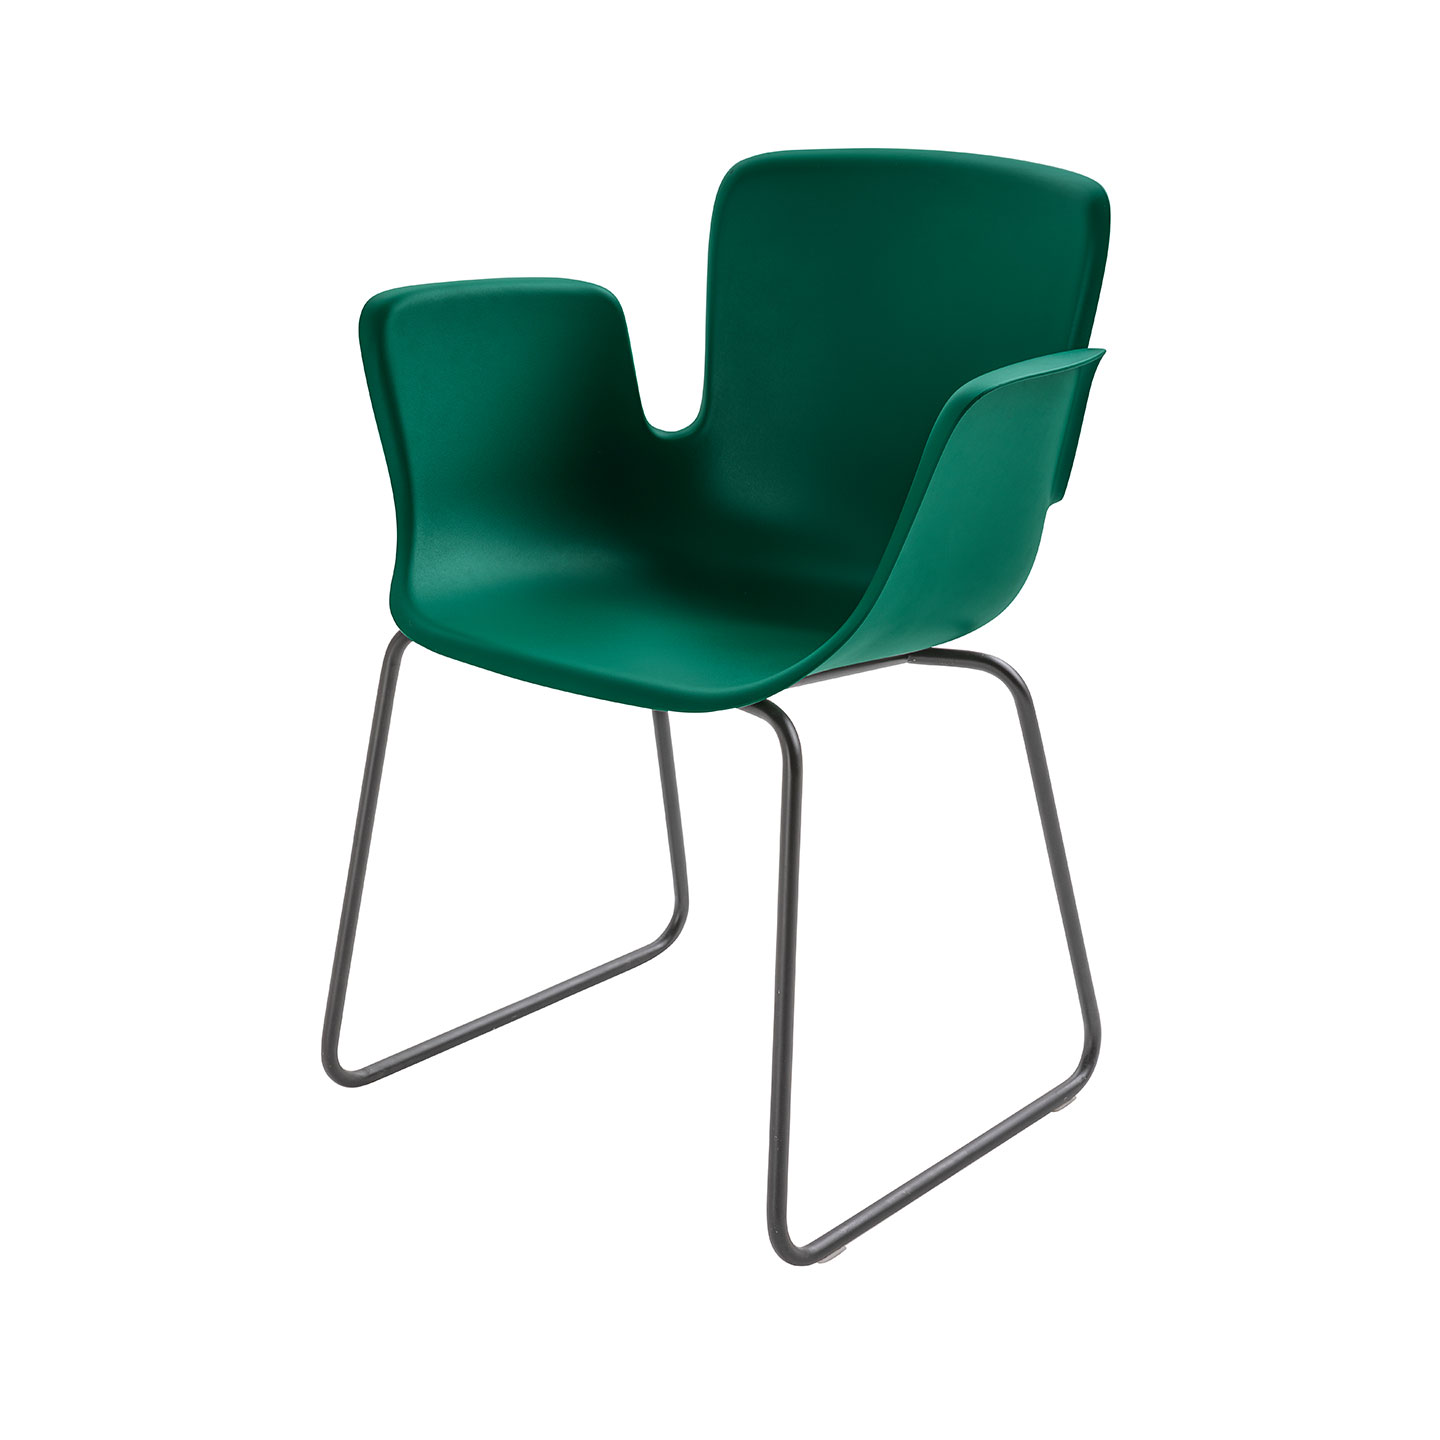 Haworth Juli Plastic chair in green color with metal legs